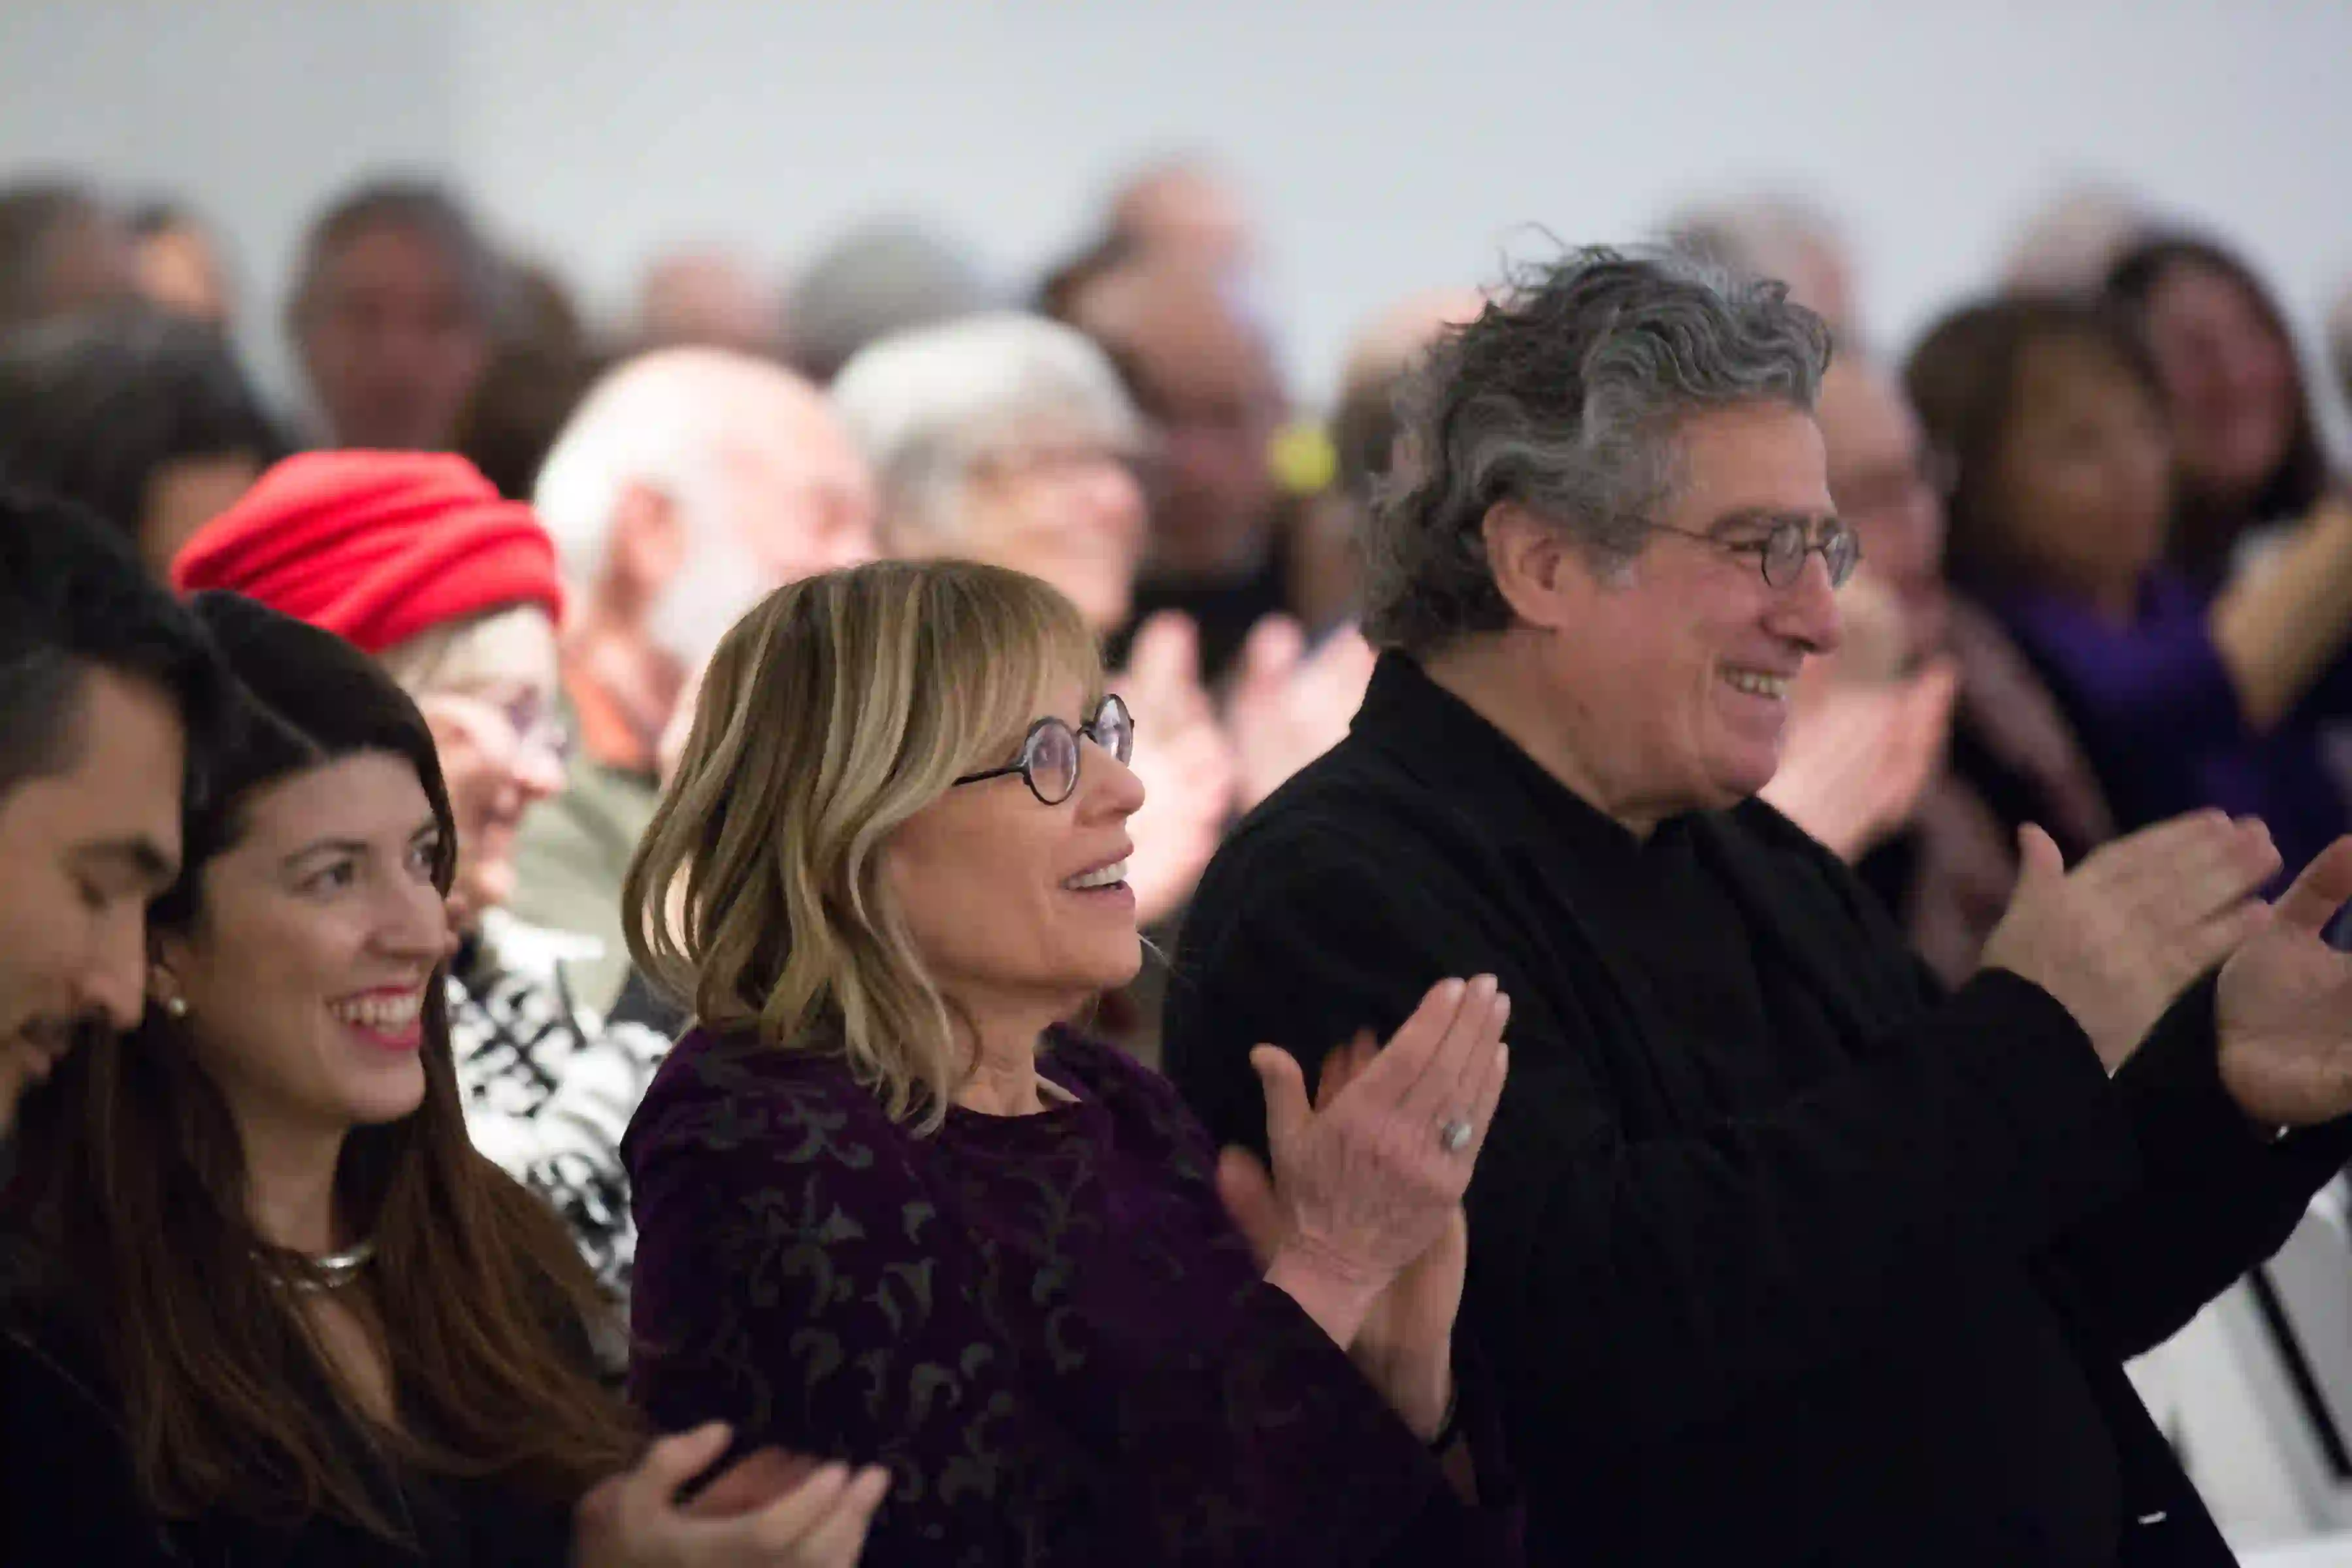 Co-founders Nancy Olnick and Giorgio Spanu applauding The Brasiles Ensemble